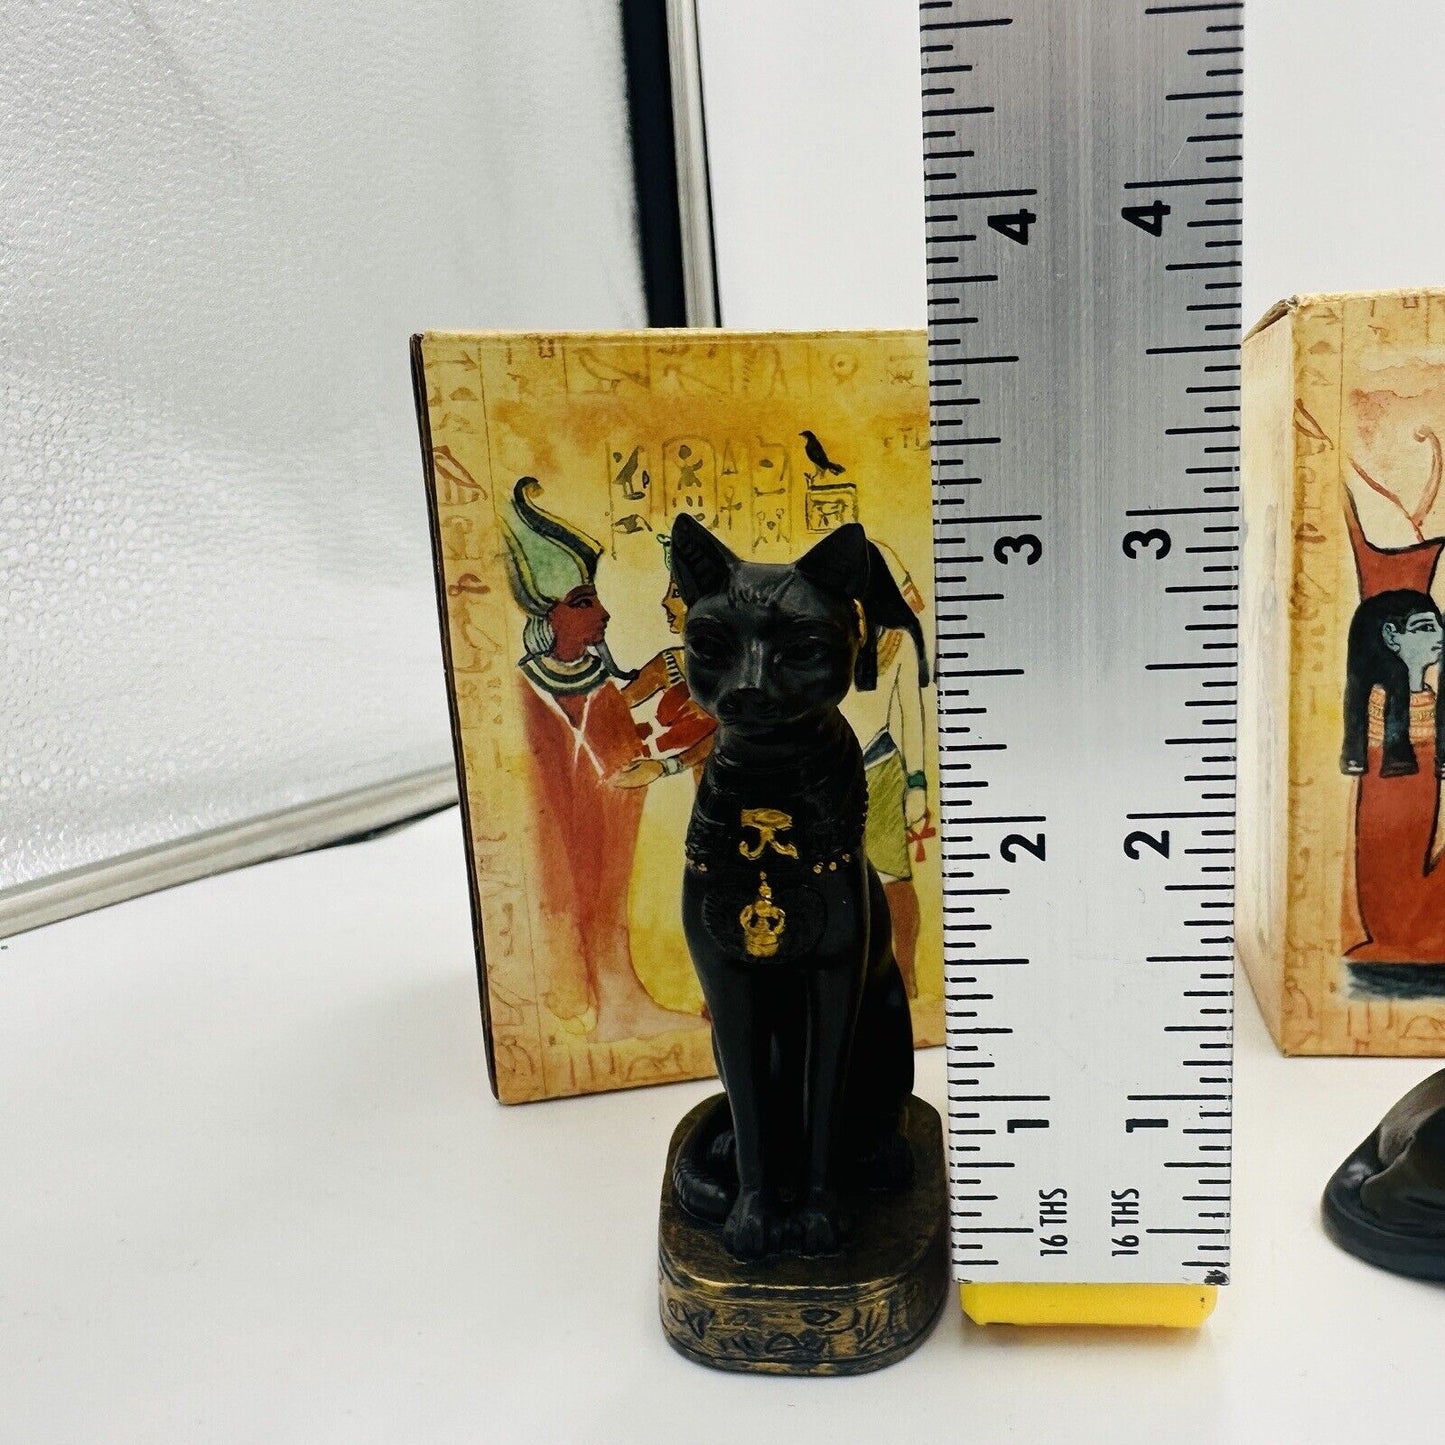 Vtg Egyptian collection figurines resin hand painted myths & Legends Adams Apple